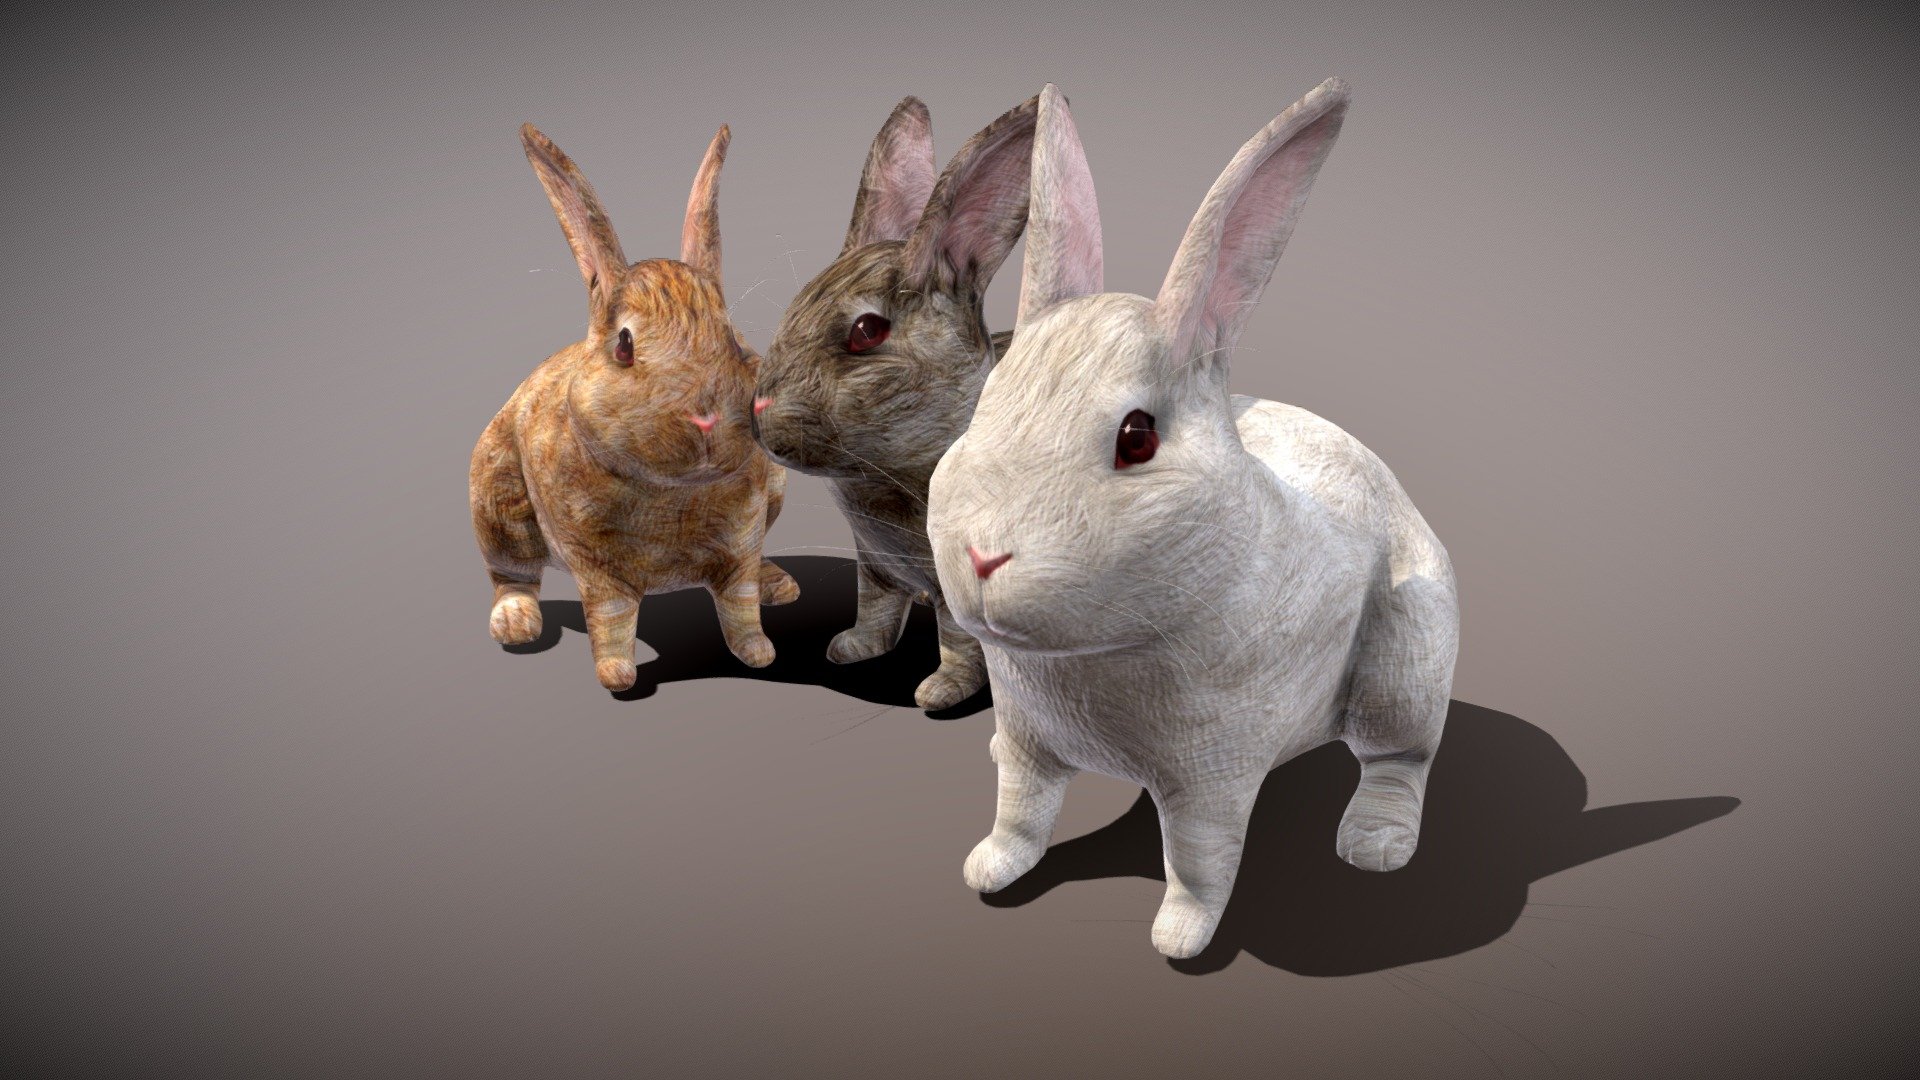 Doing a rabbit, there is material, have a normal map, binding, can do the animation, comparative fine texture is larger
= = = = = = = = = = = = = = = = = = = = = = = = = = = = = = = = = = = = = = = = = = = = = = = = 
Other works ~ welcome to visit my home page - Rabbit lovely rabbit three only - Buy Royalty Free 3D model by mpc199075 3d model